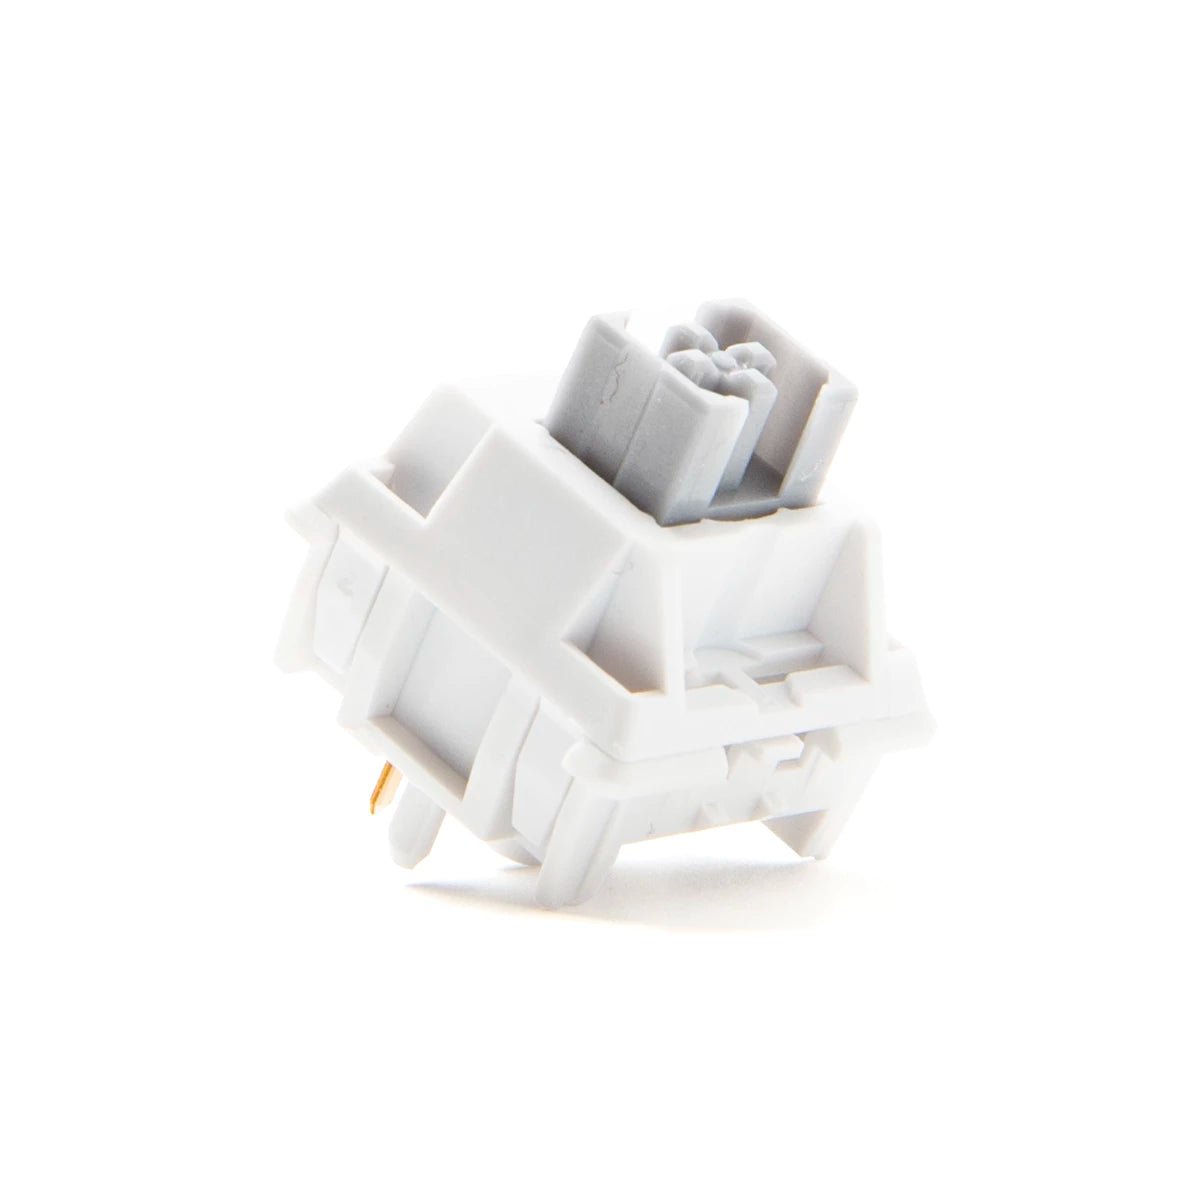 Wuque WS Silent Tactile Switches 5 Pines x10u